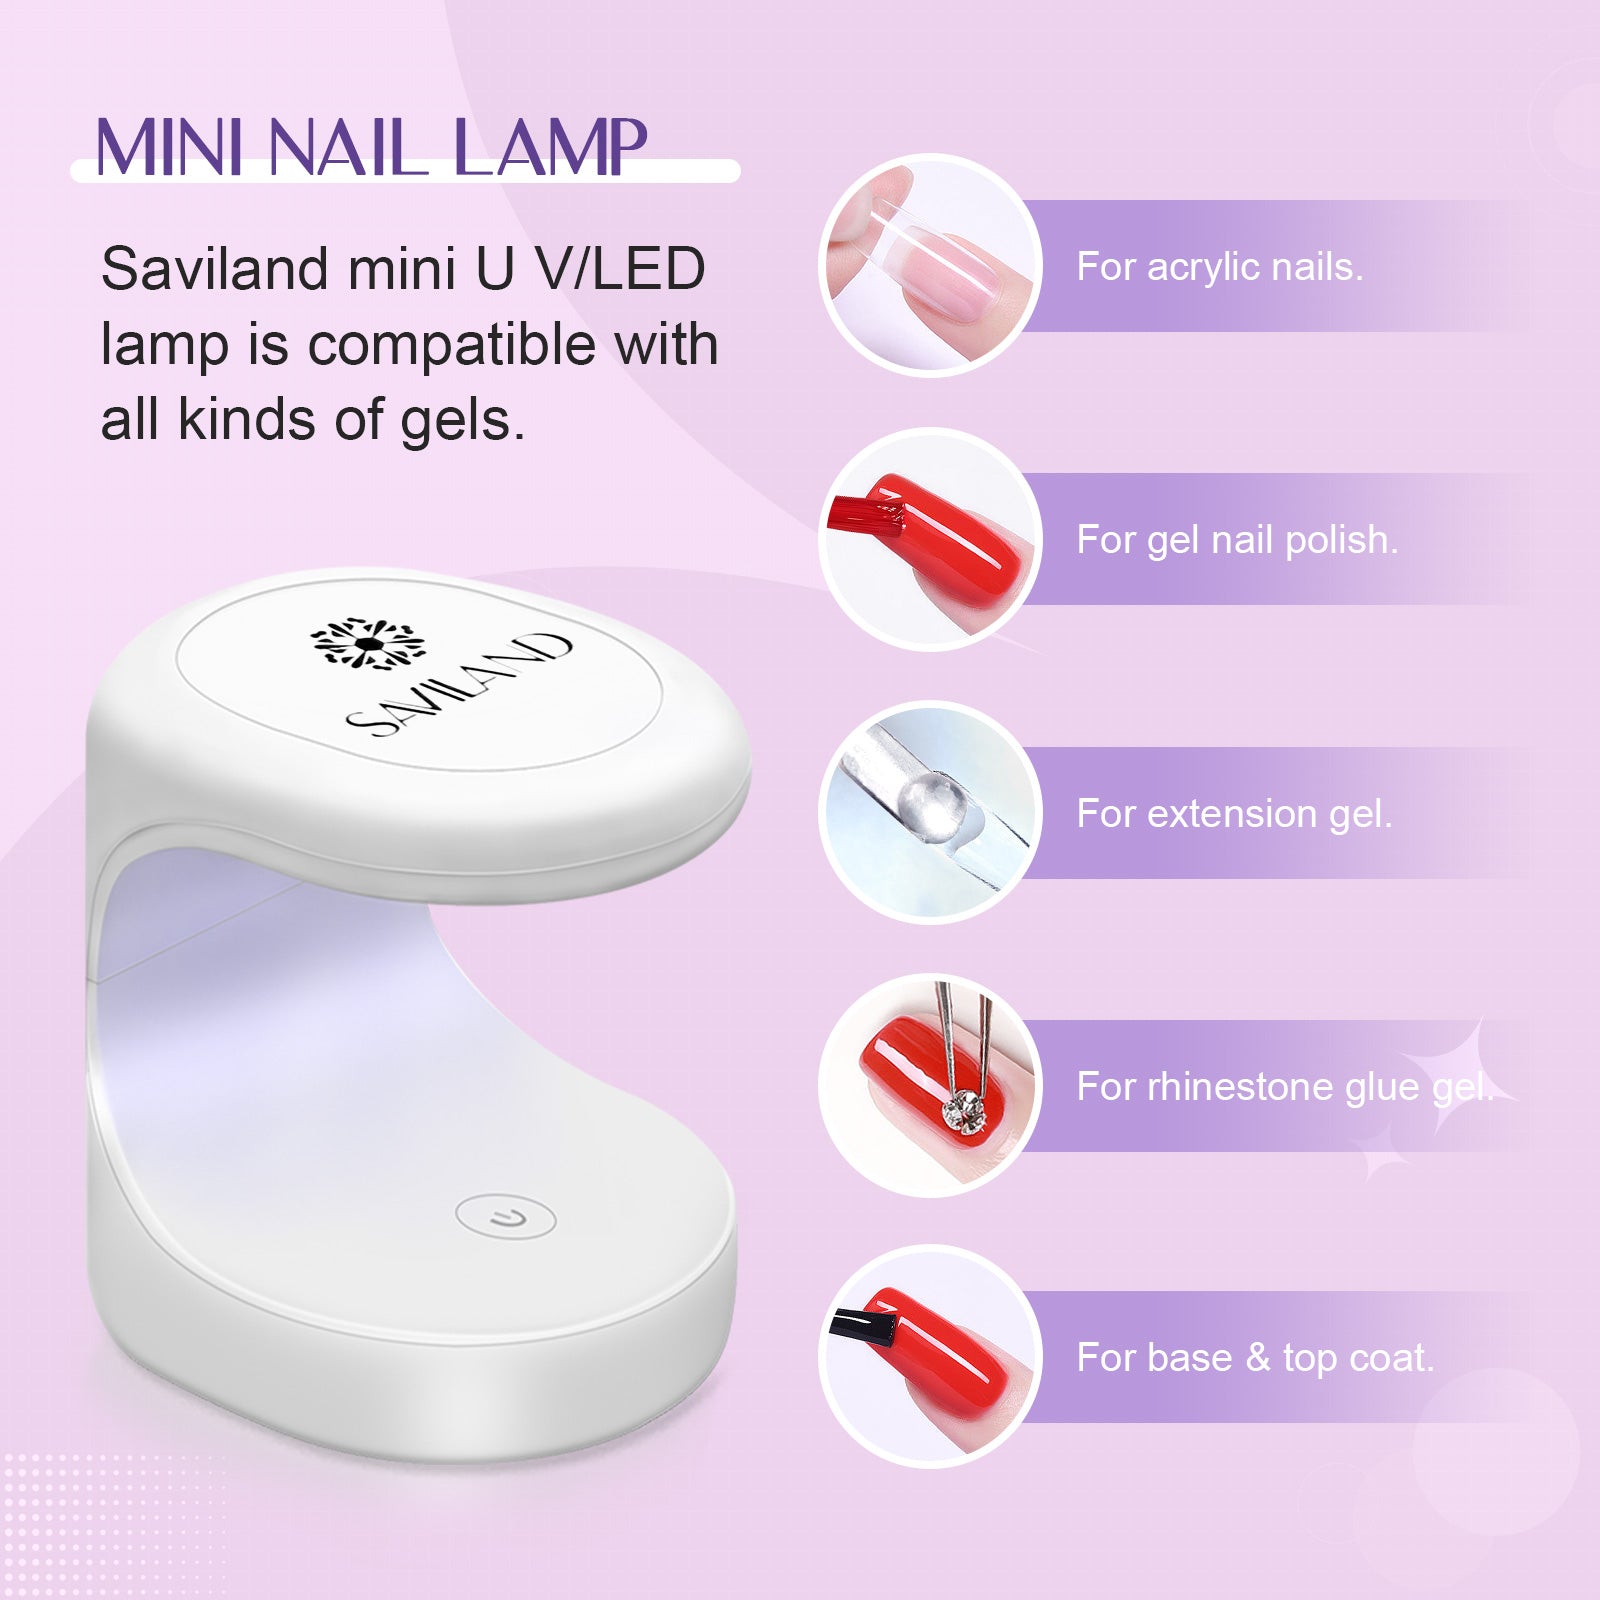 [US ONLY]Nail Tips and Solid Nail Glue Gel kit